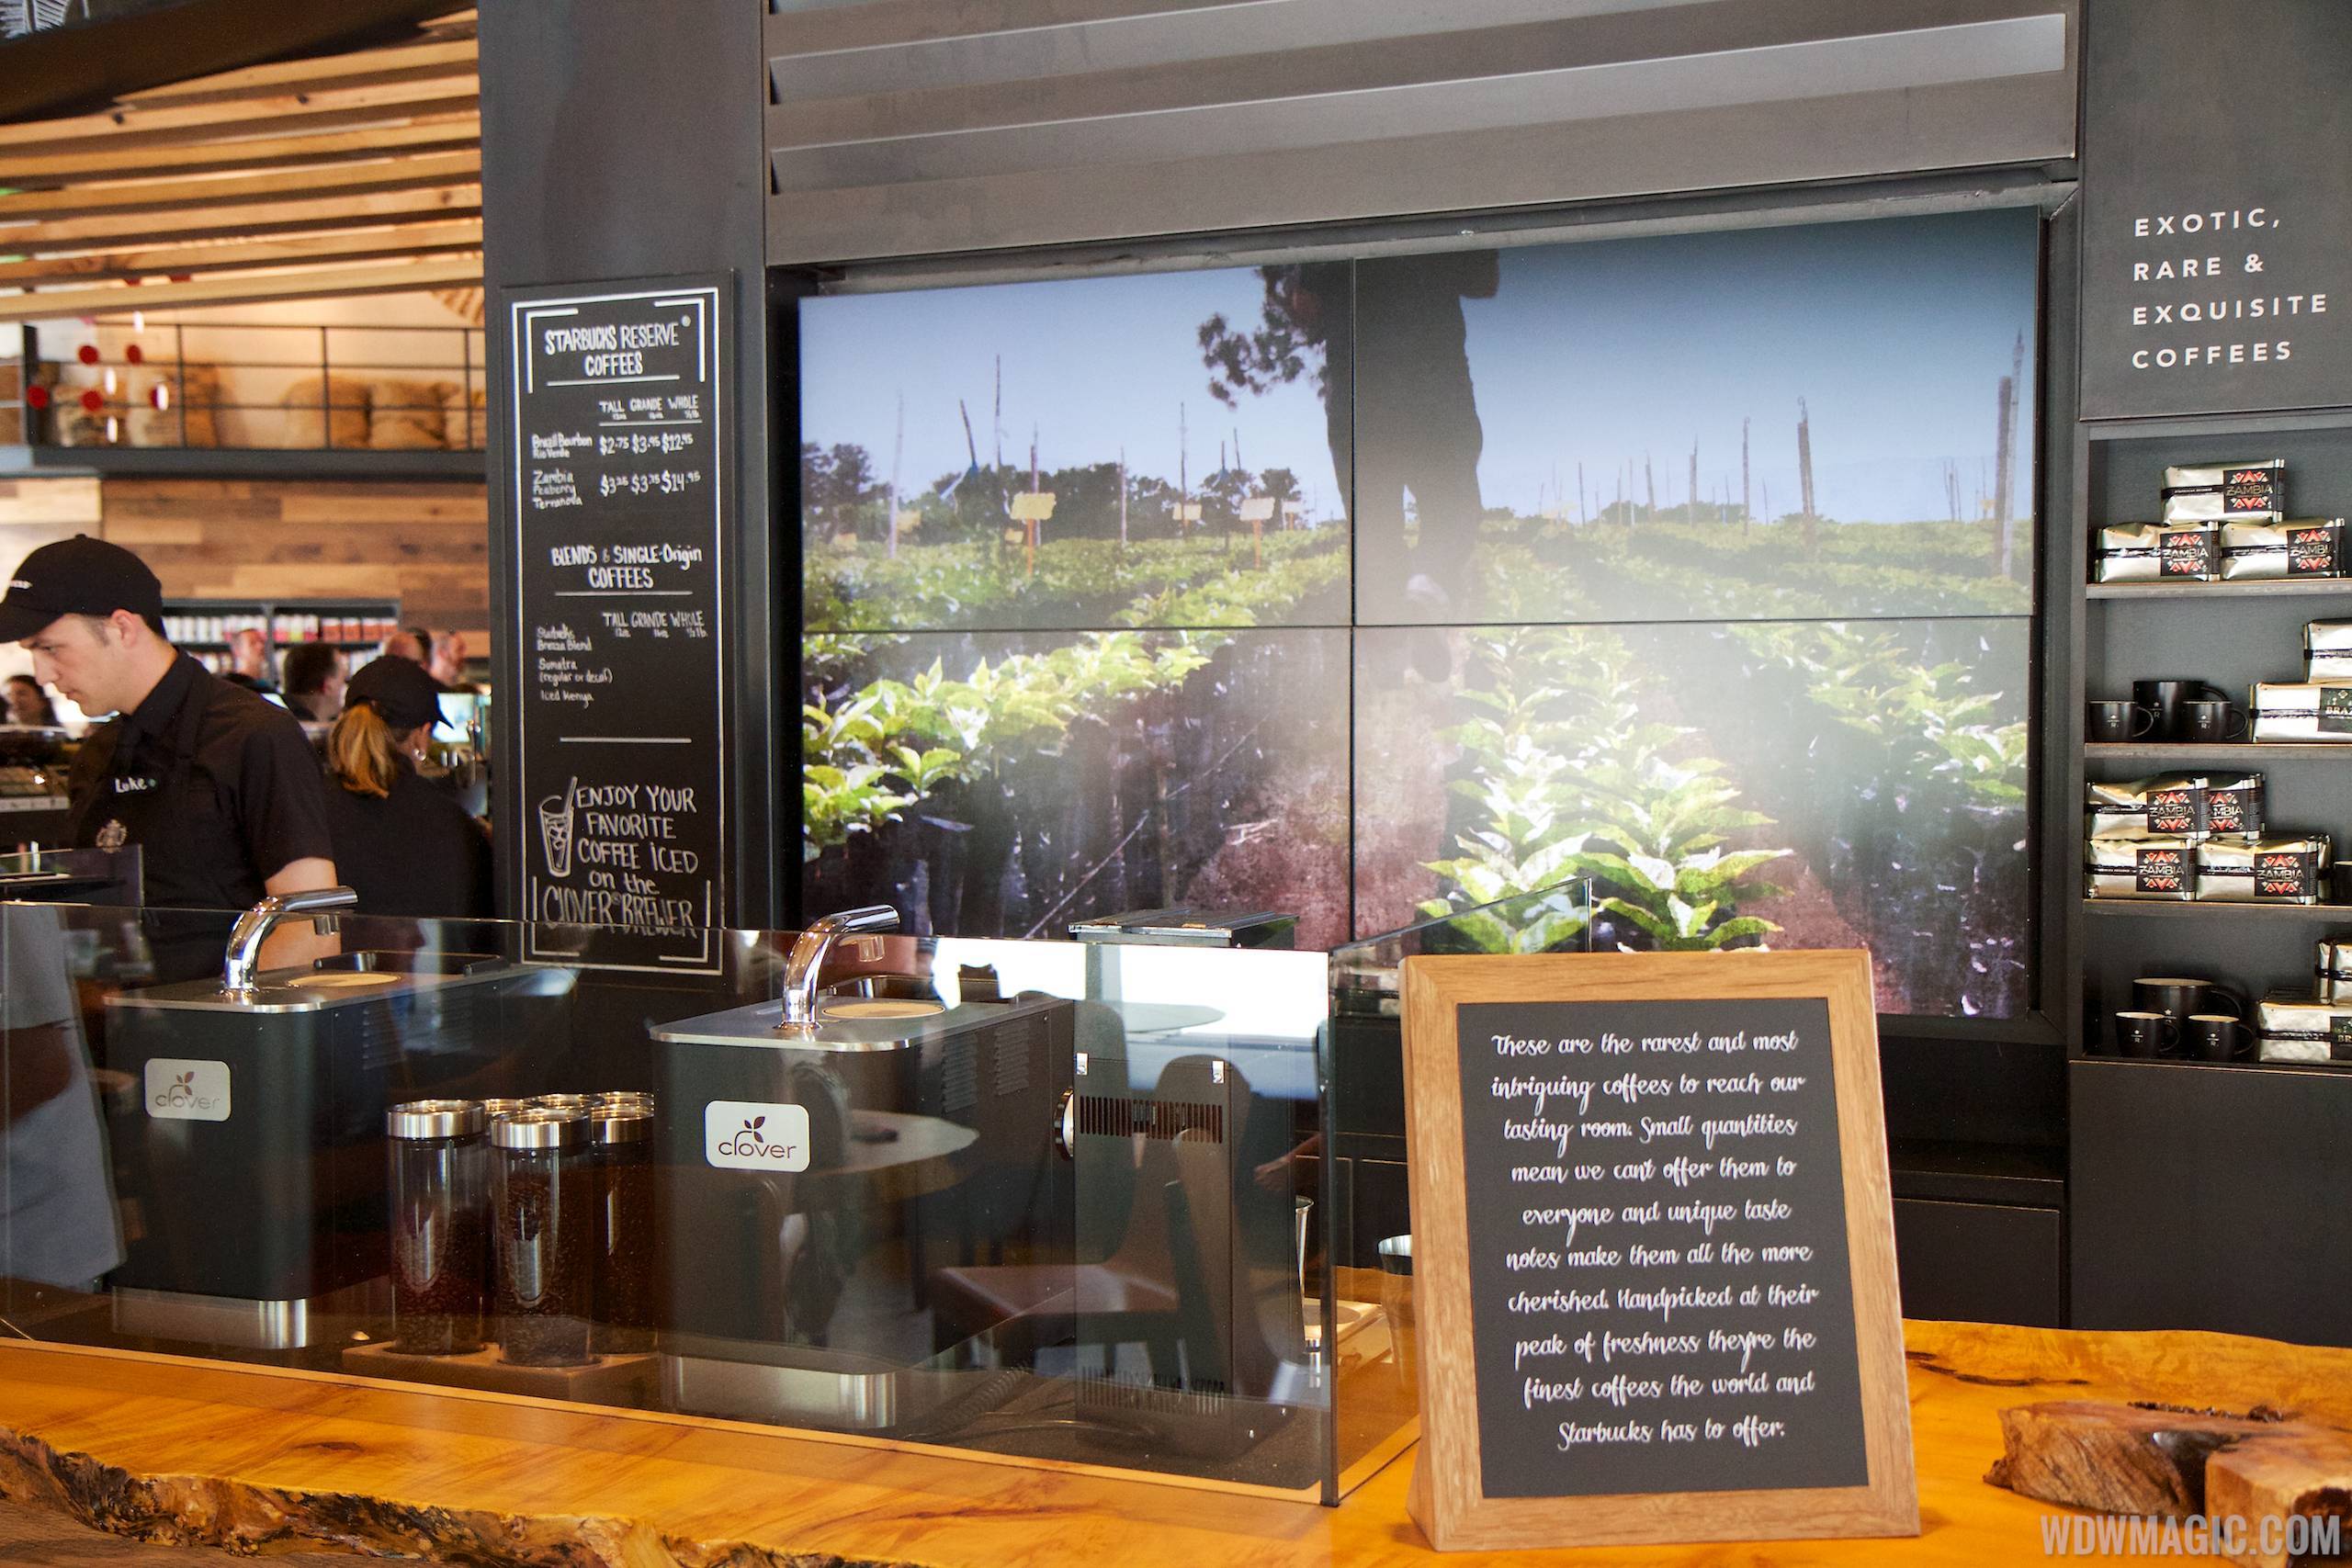 PHOTOS - A look at the completed Starbucks West Side